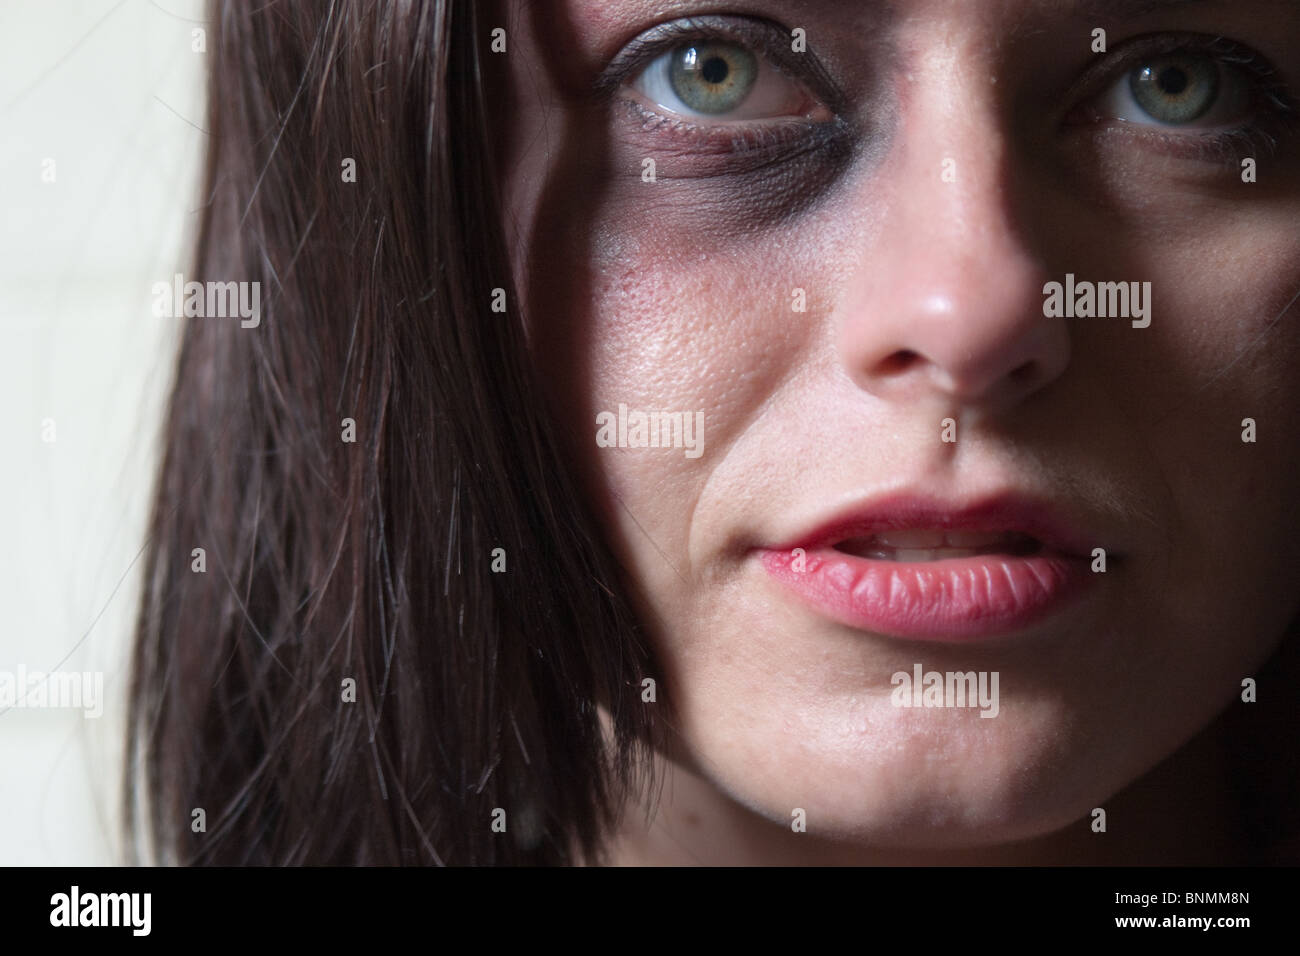 Close-up of beautiful woman with bruised eye Stock Photo